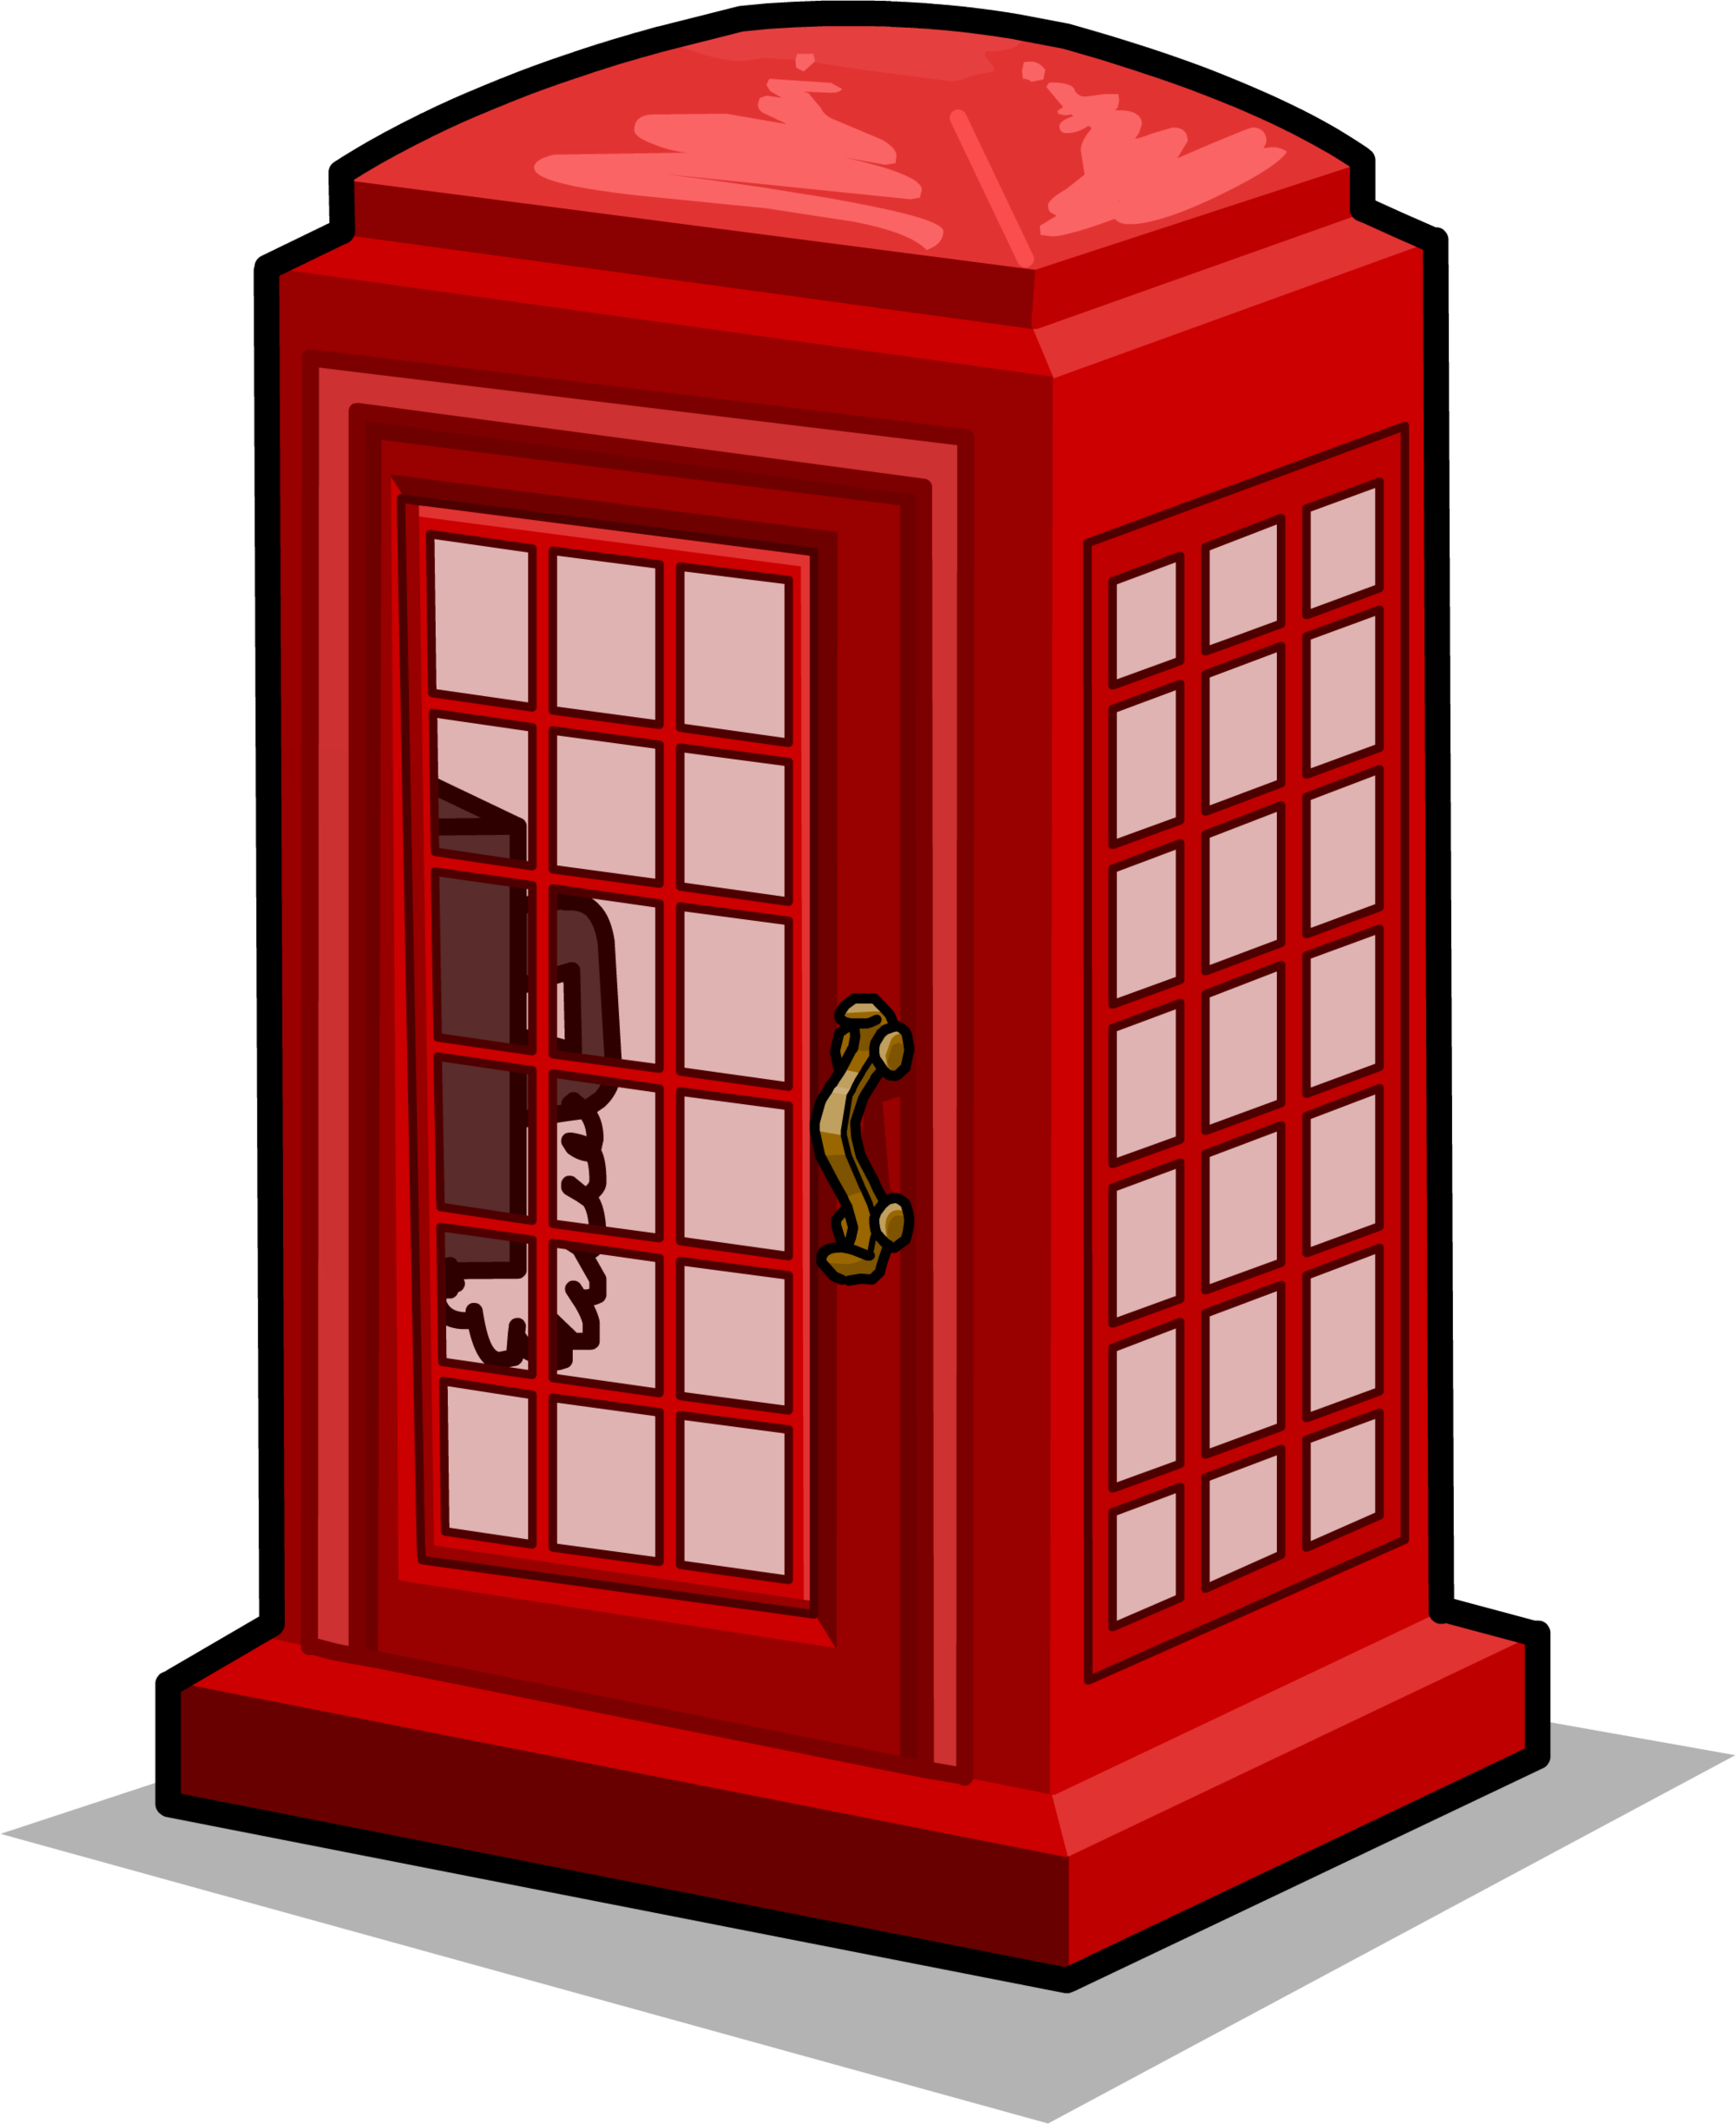 This High Quality Free Png Image Without Any Background - Telephone Booth Club Penguin (2000x2447)